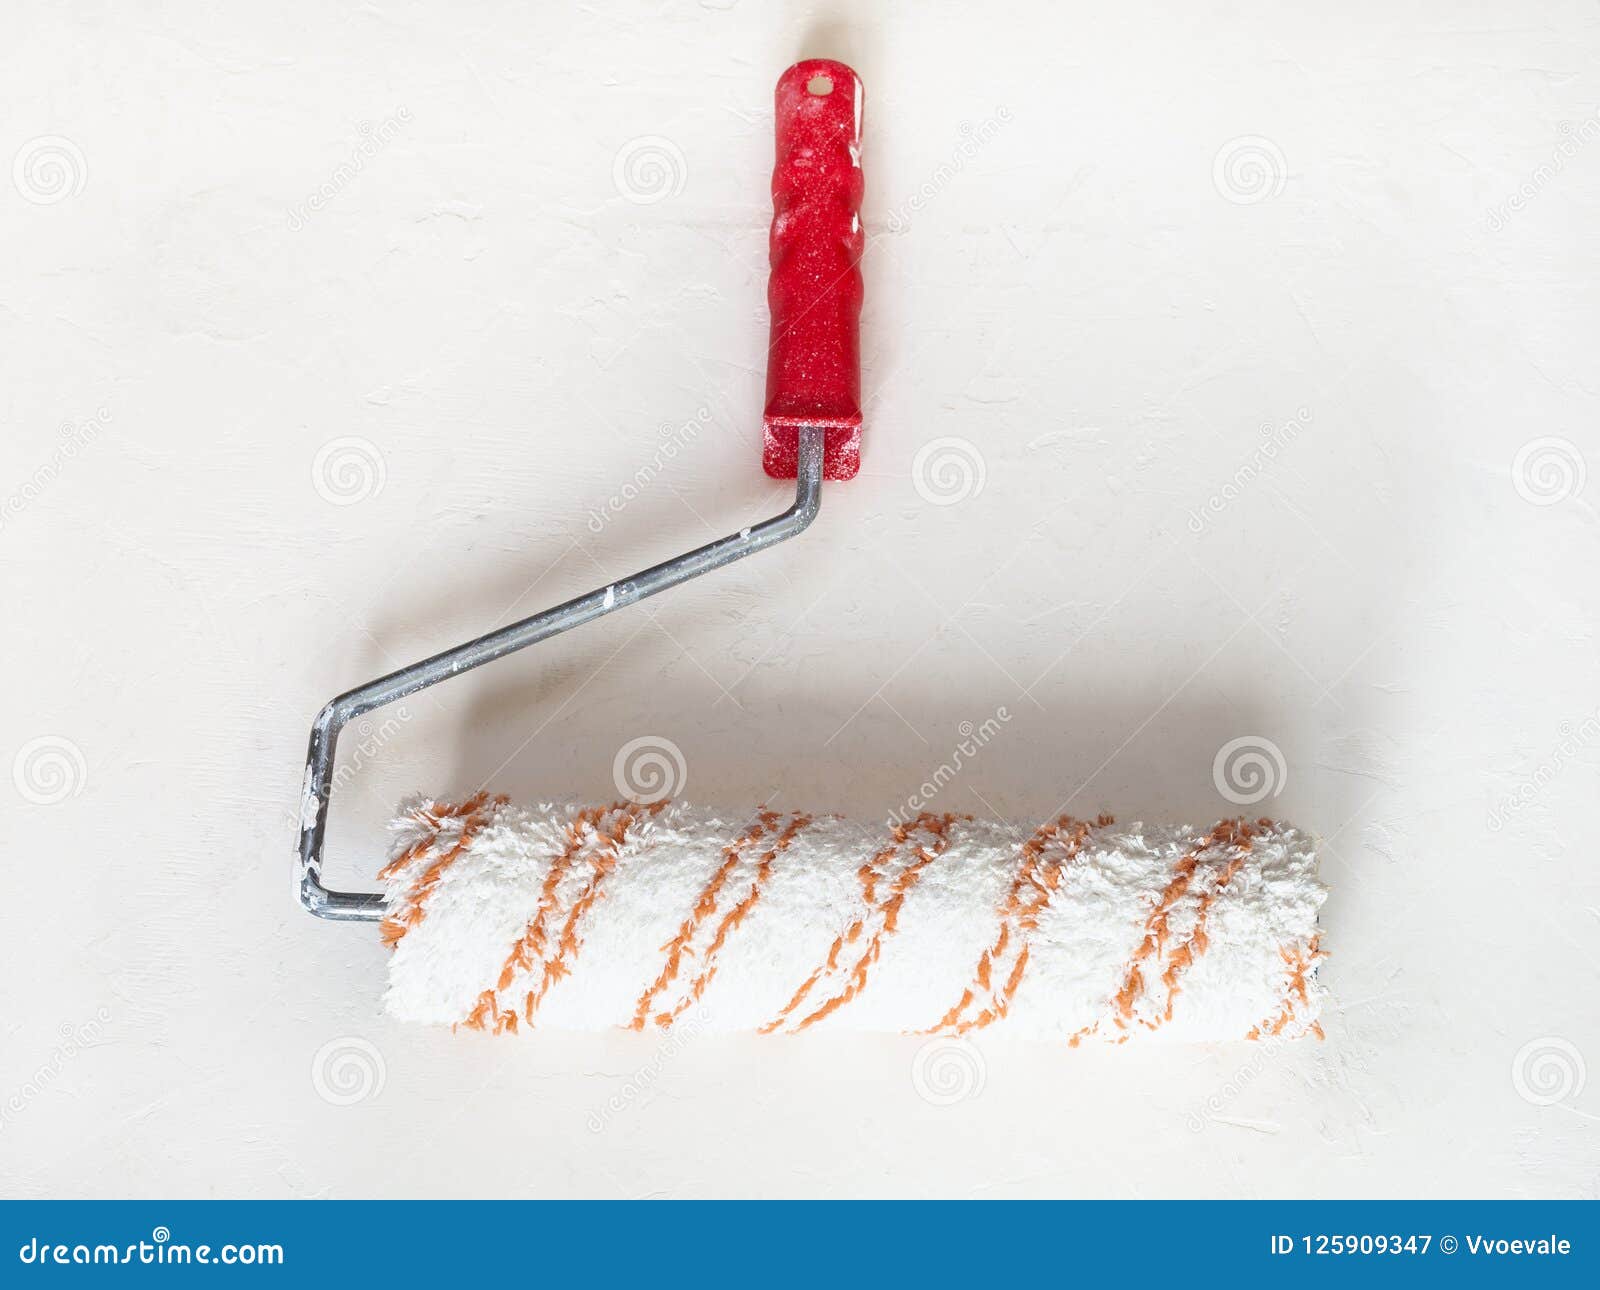 Used Dry Paint Roller On Plastered Surface Stock Image